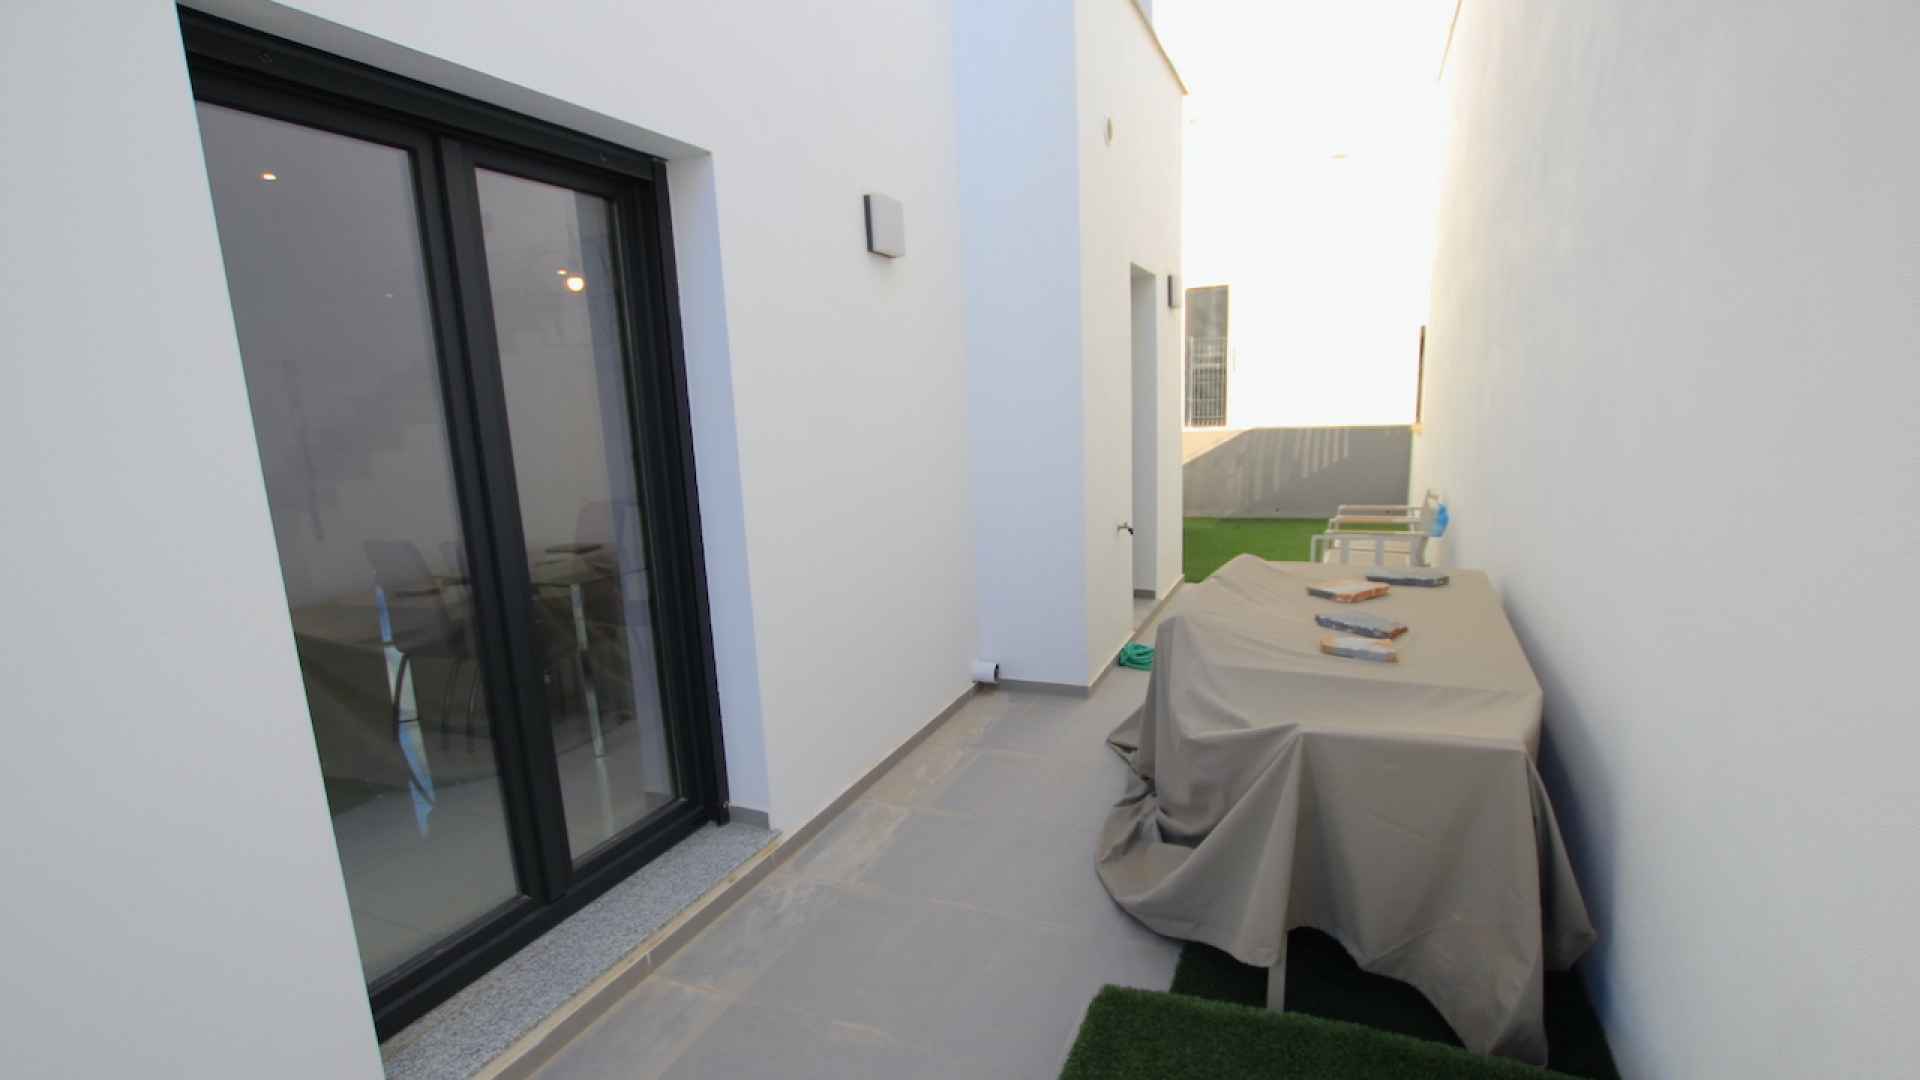 48308_stunning_3_bedroom_villa_in_a_highly_sough_after_location_201223102905_img_5039